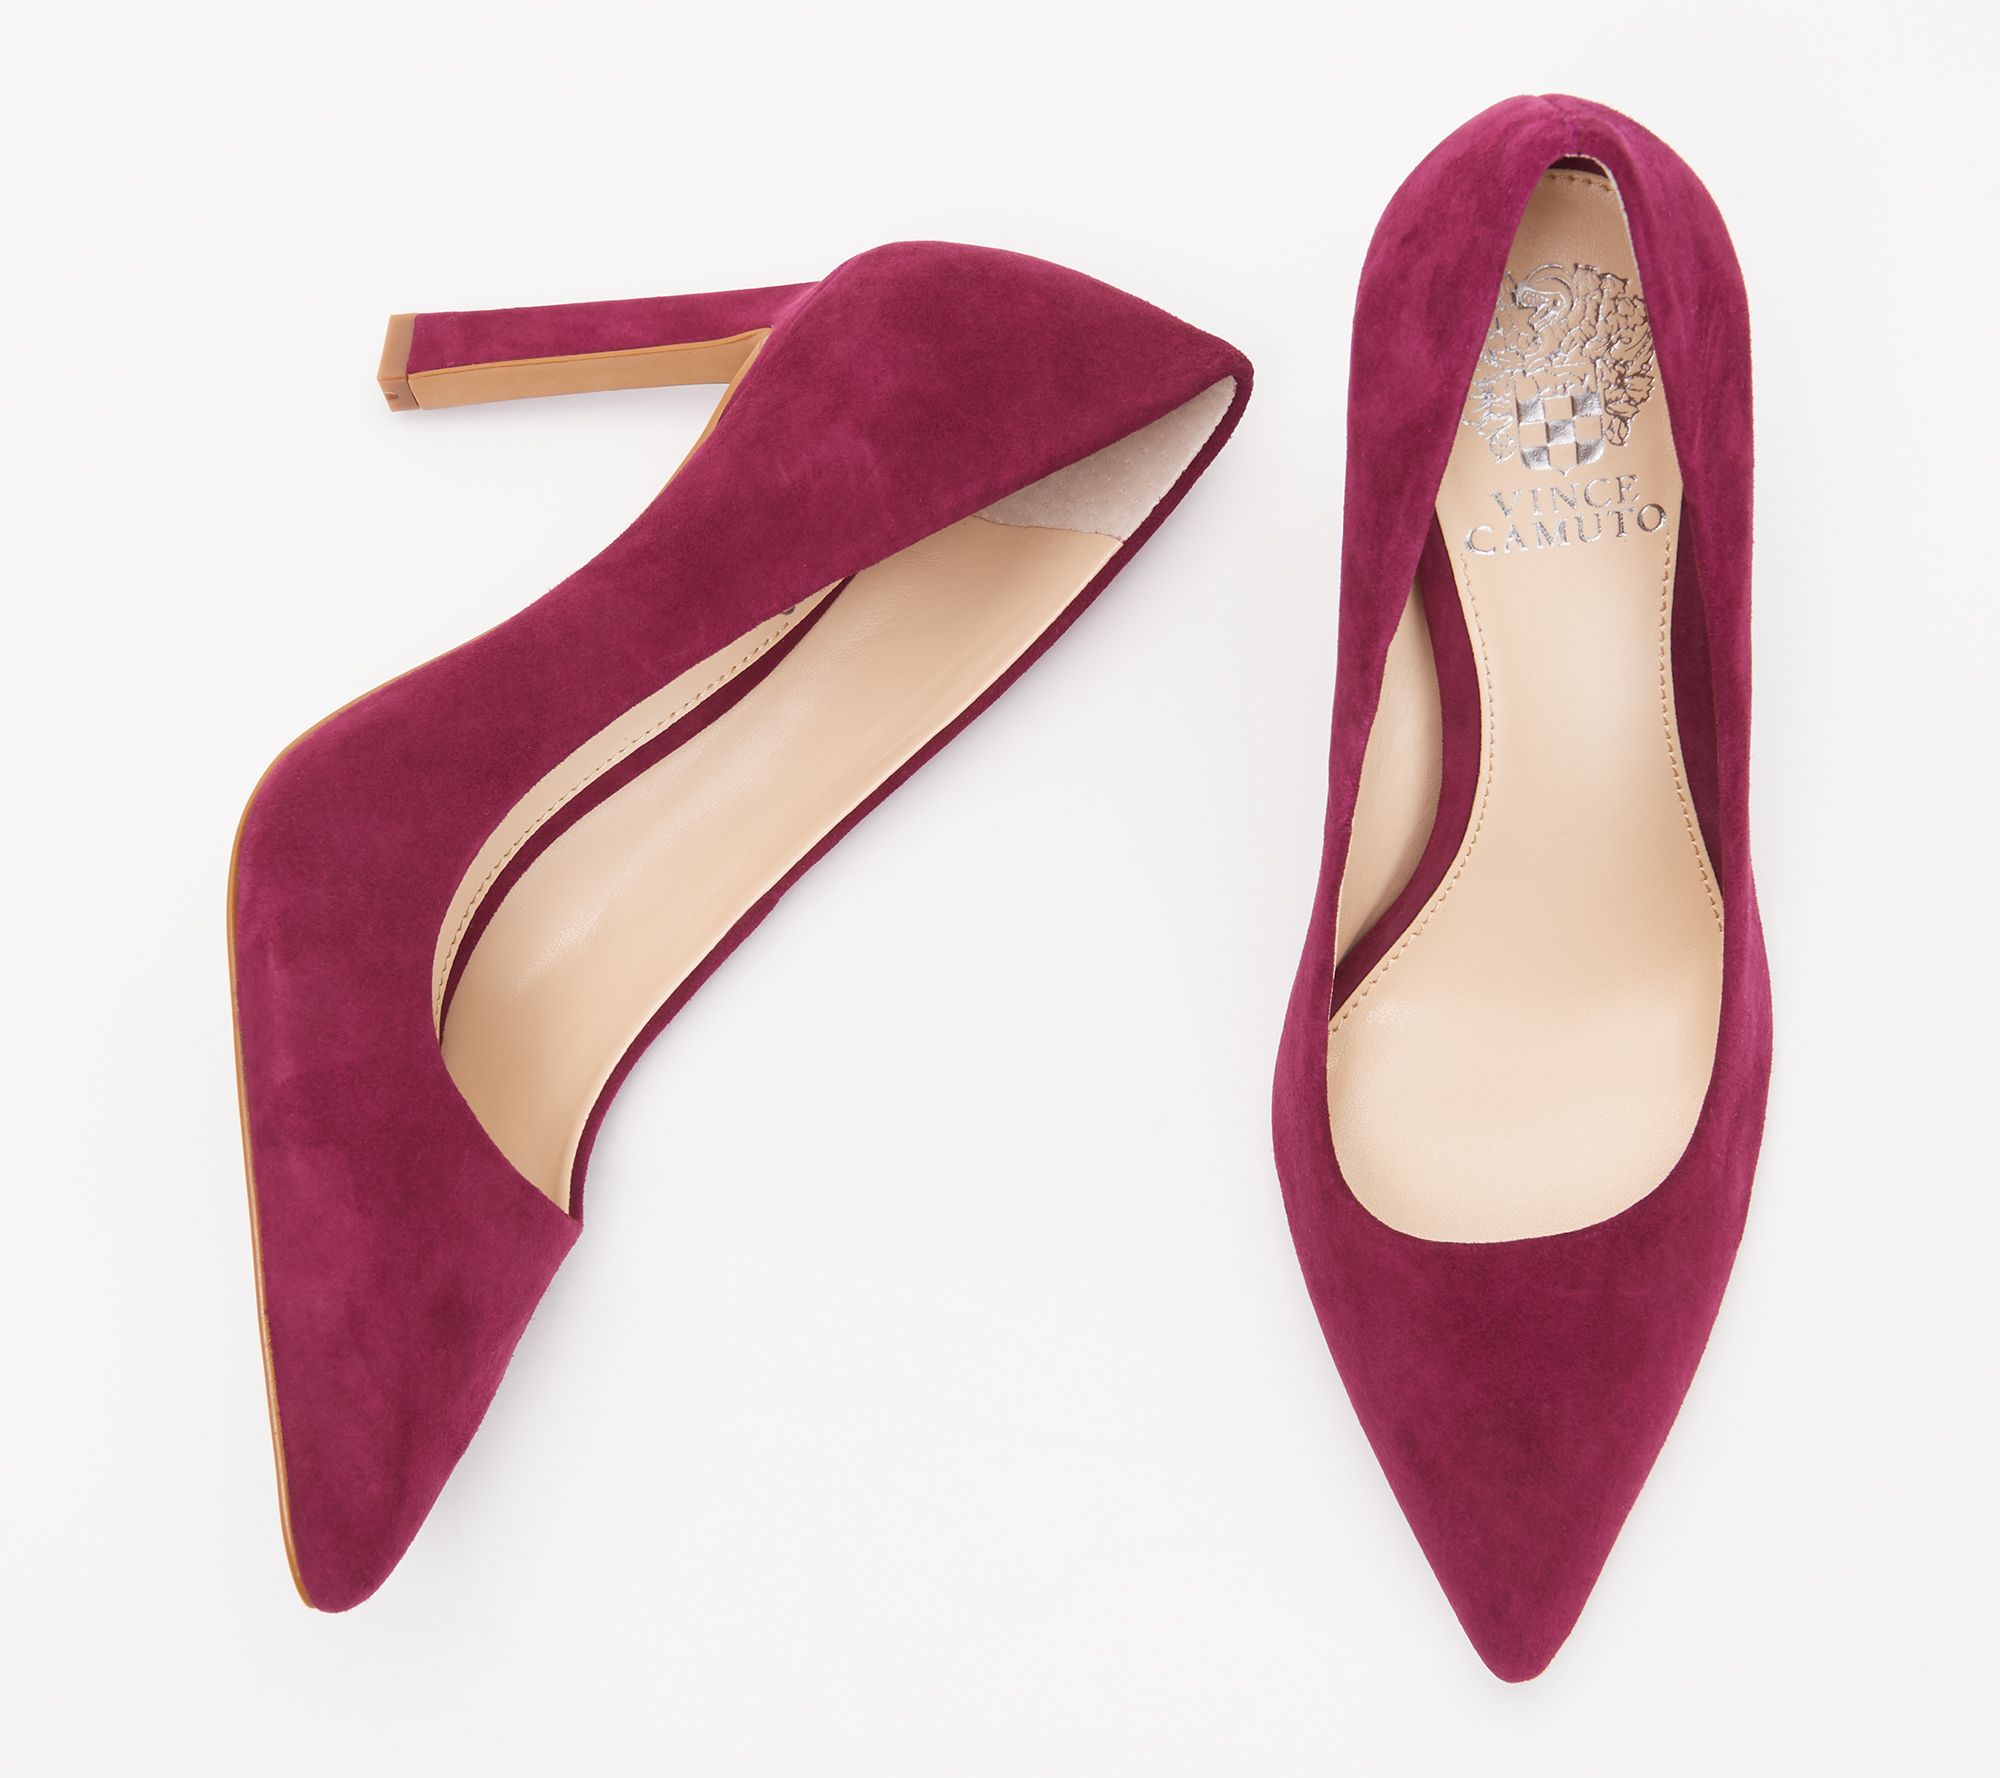 Vince Camuto Leather Pointed Toe Pumps 